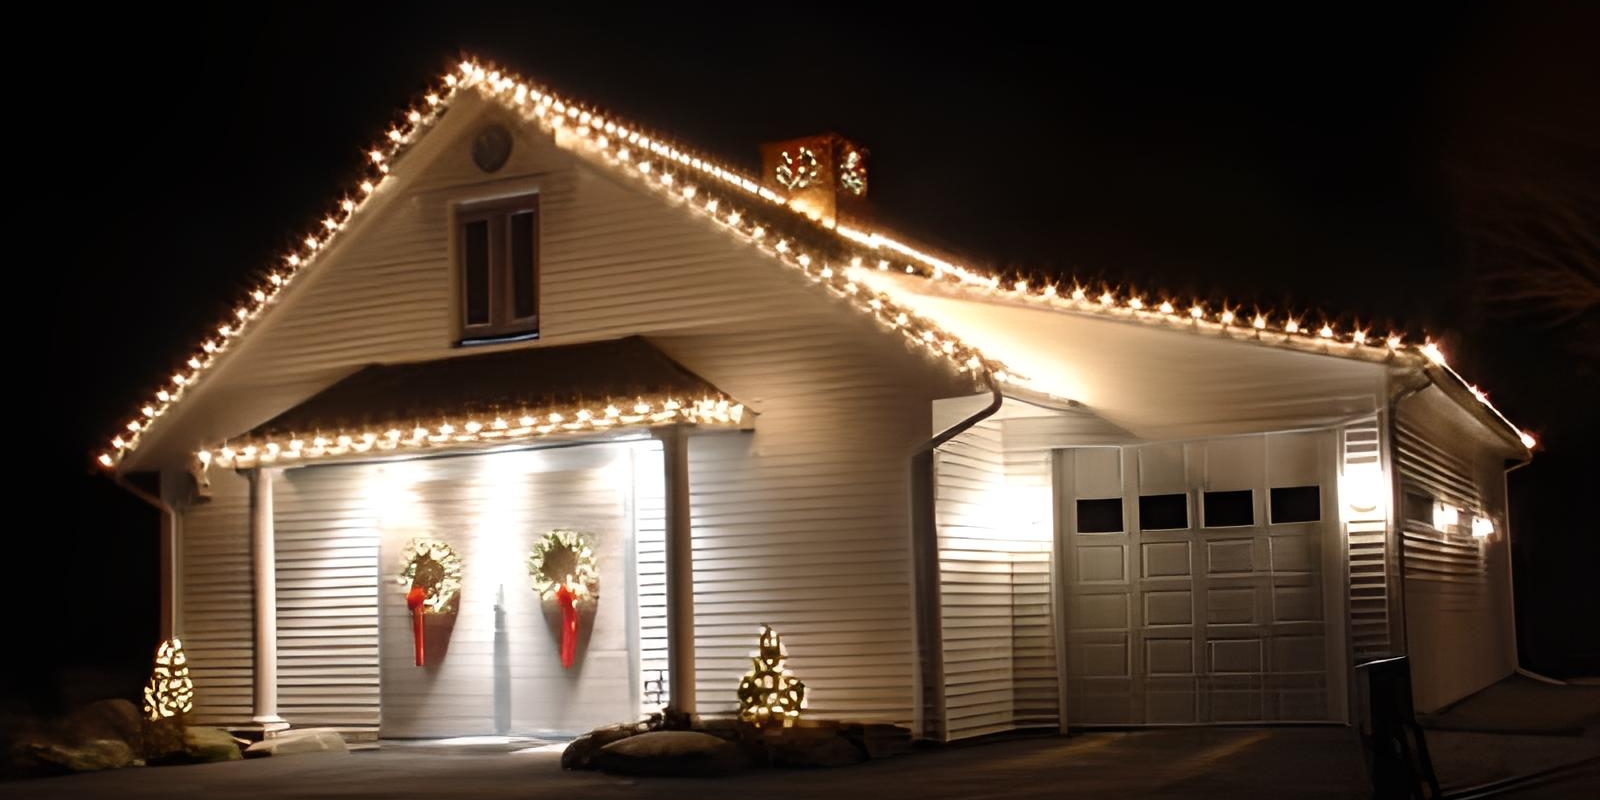 Adding Festive Flair to Your Horse Stall Gates